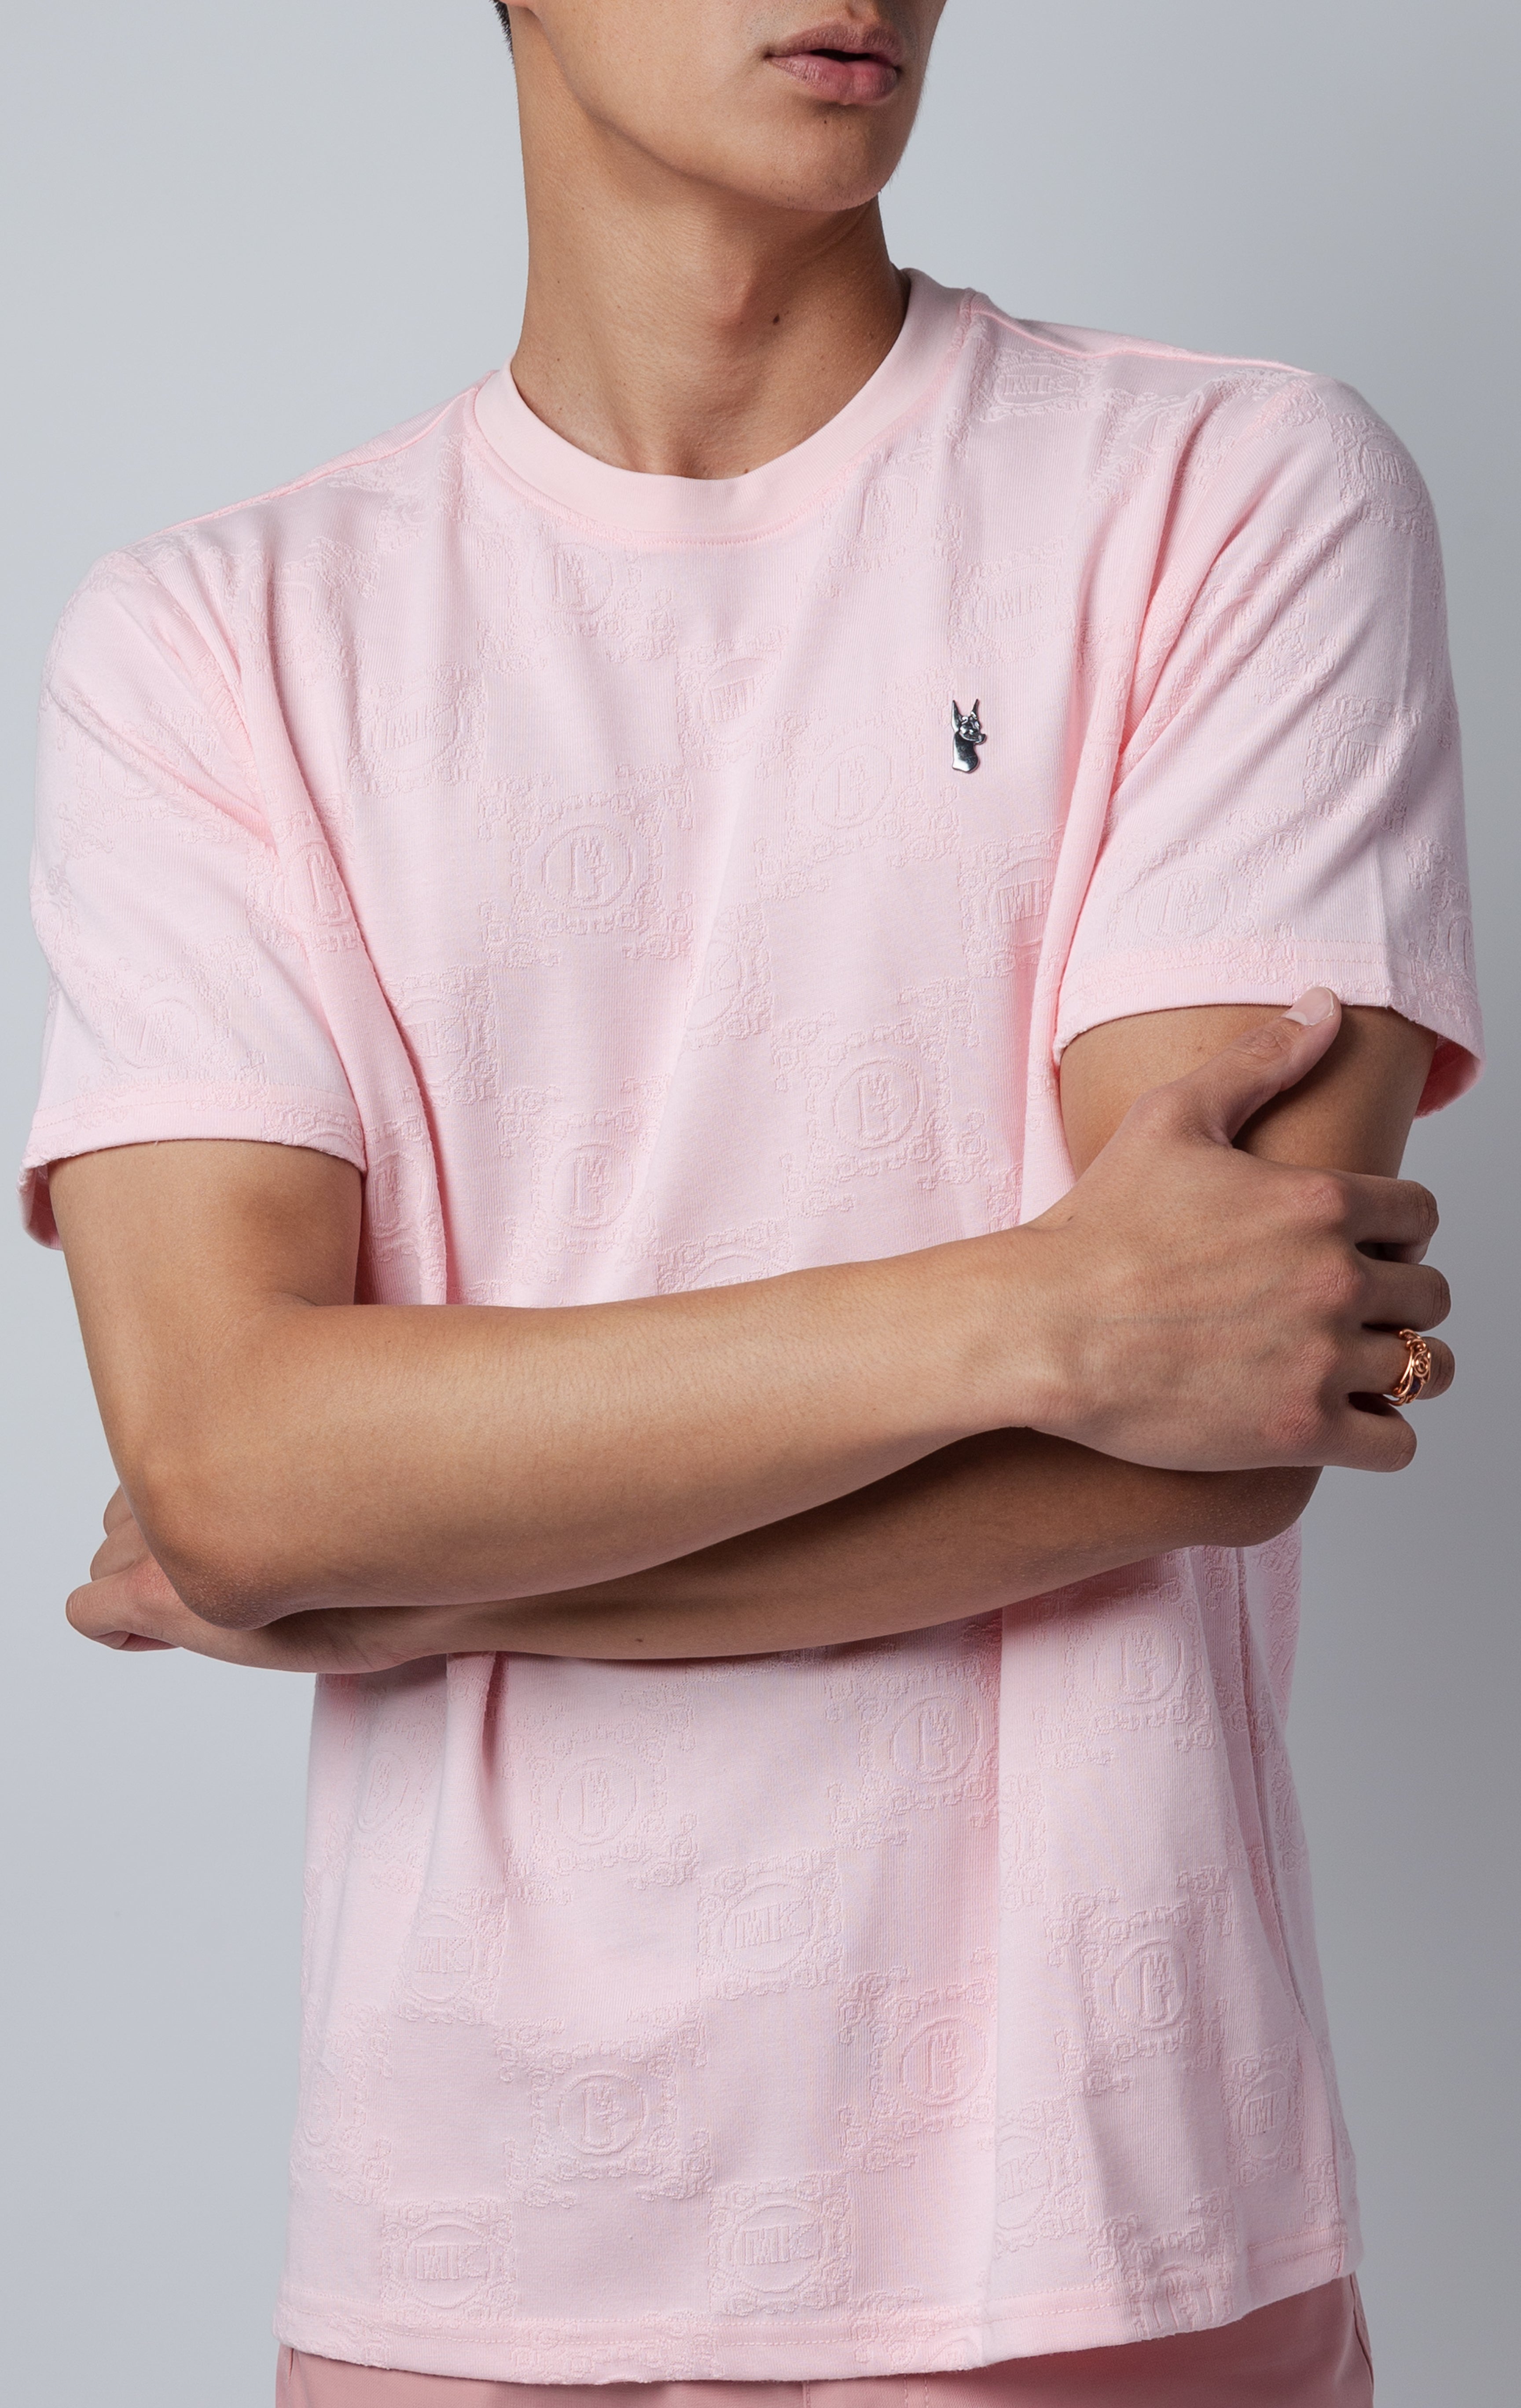 Pink t-shirt with Unique Embossed design and makobi logo